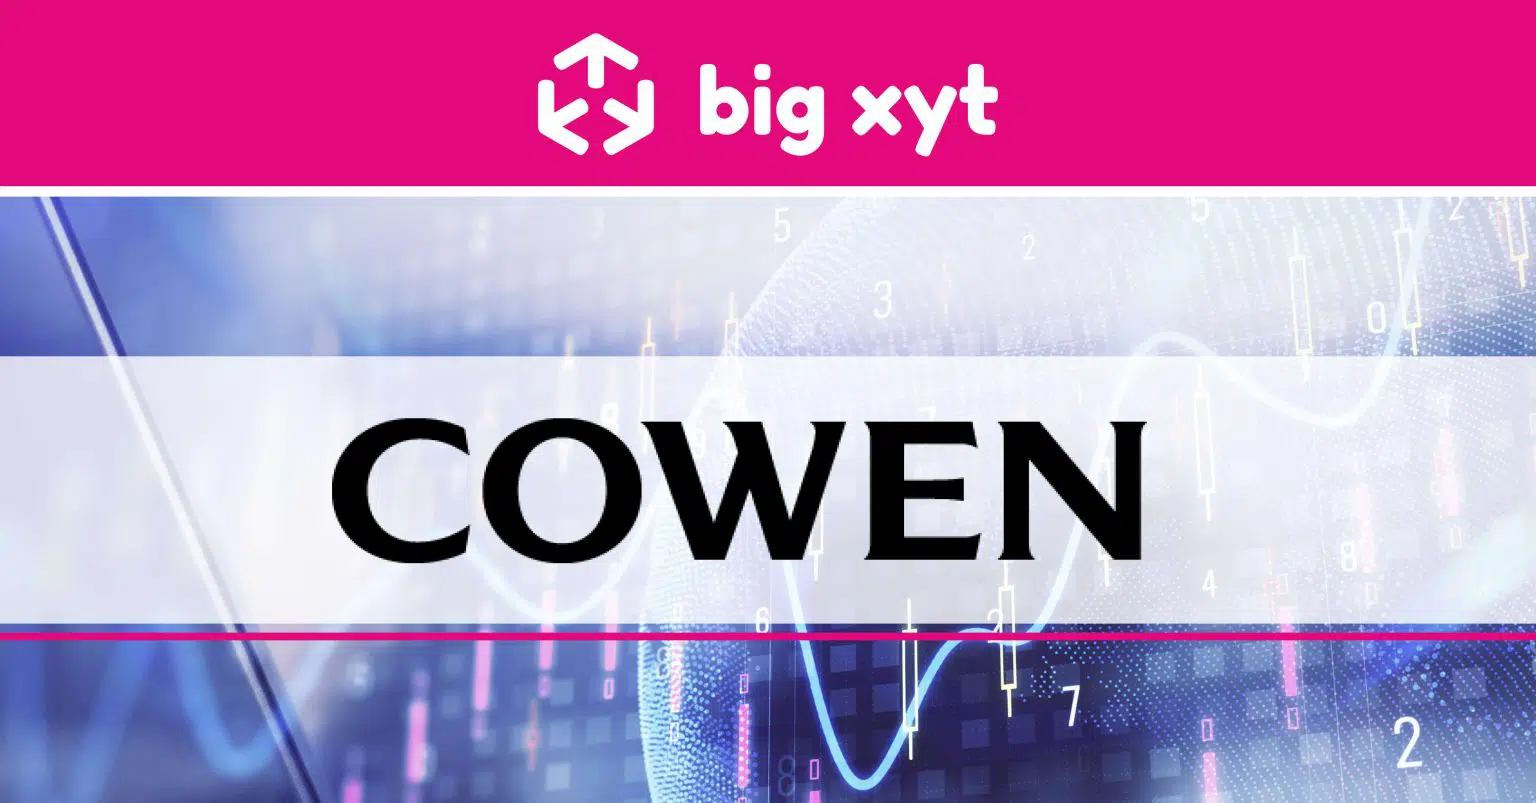 Cowen Execution Services selects big xyt to support continued growth in European equities trading